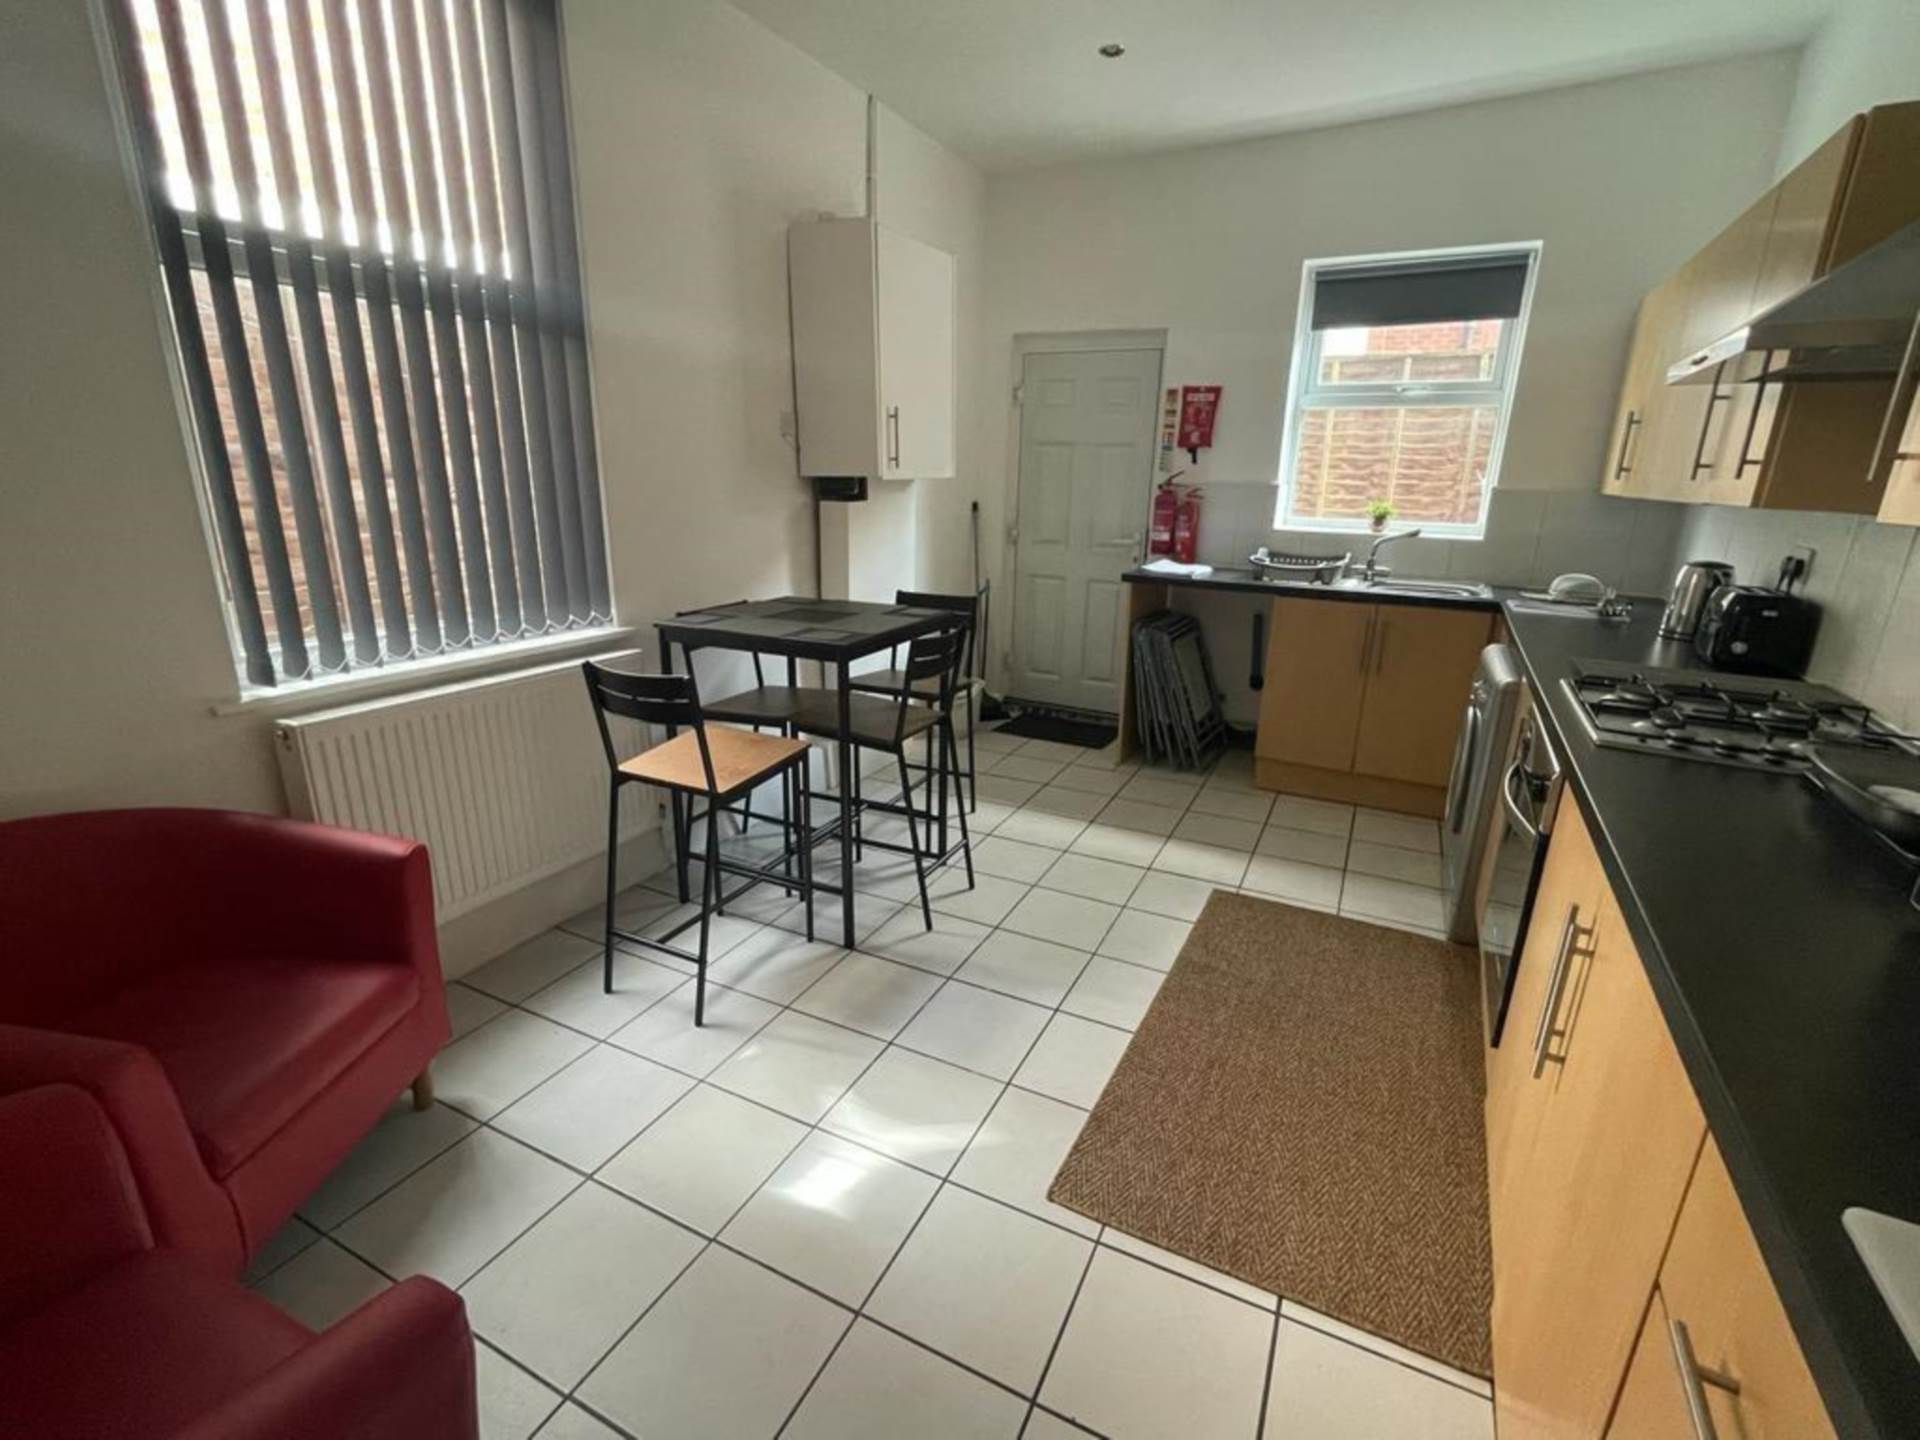 Thornycroft Road, Wavertree - STUDENTS/PROFESSIONALS - 2 Rooms Available, Image 4